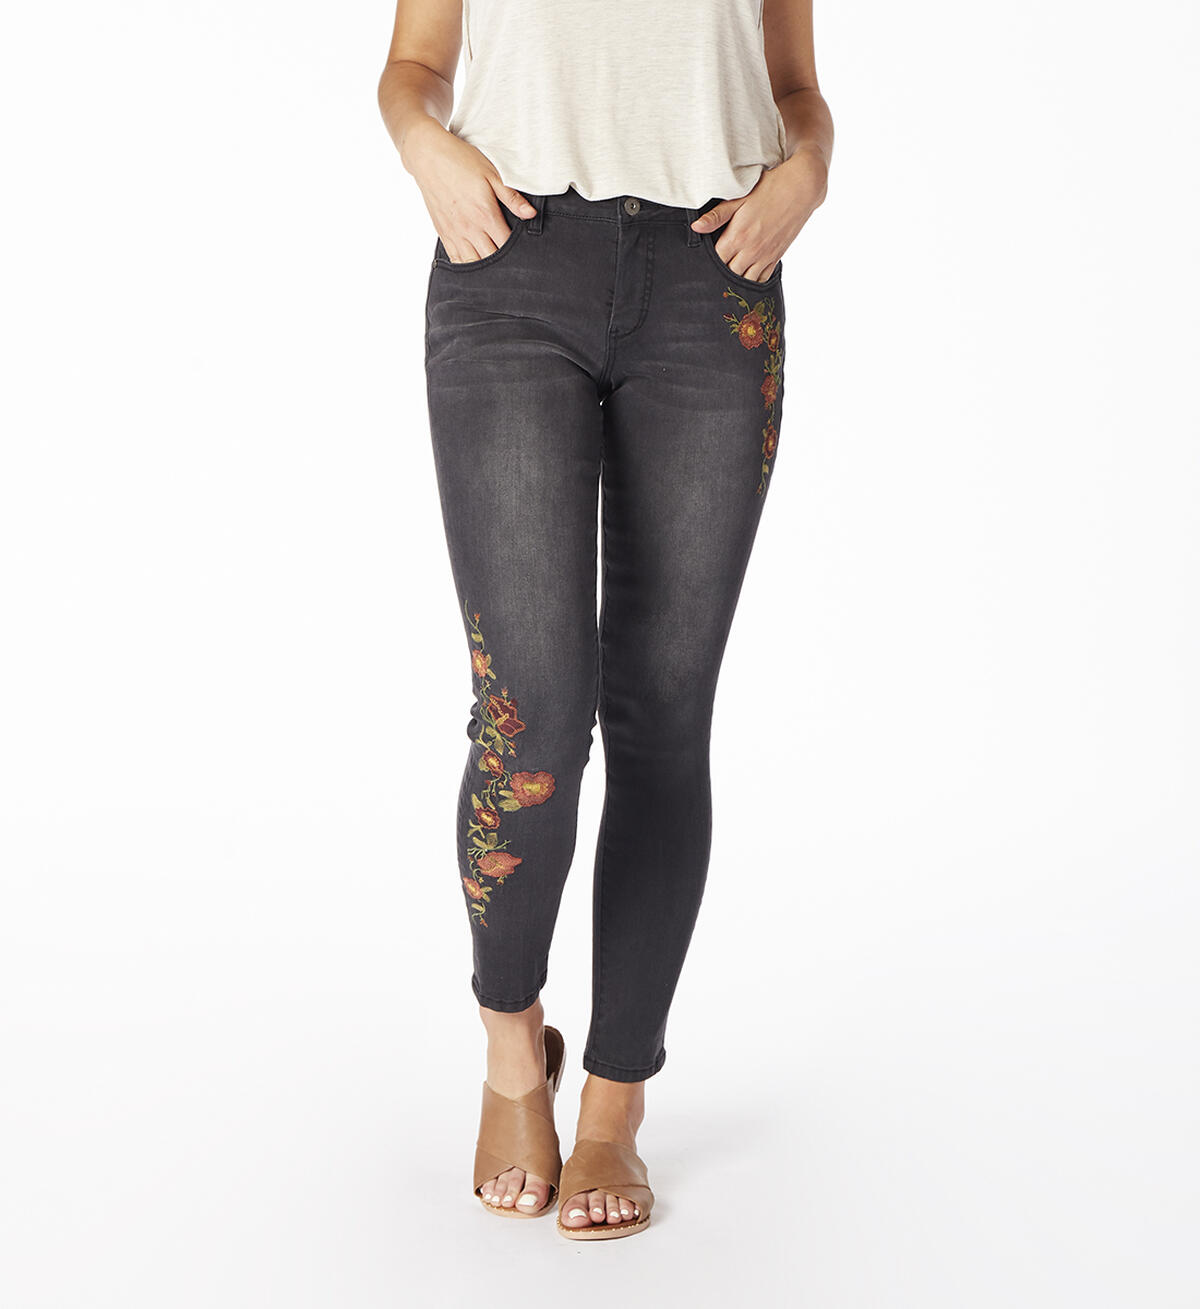 Sheridan Skinny With Embroidery, , hi-res image number 0